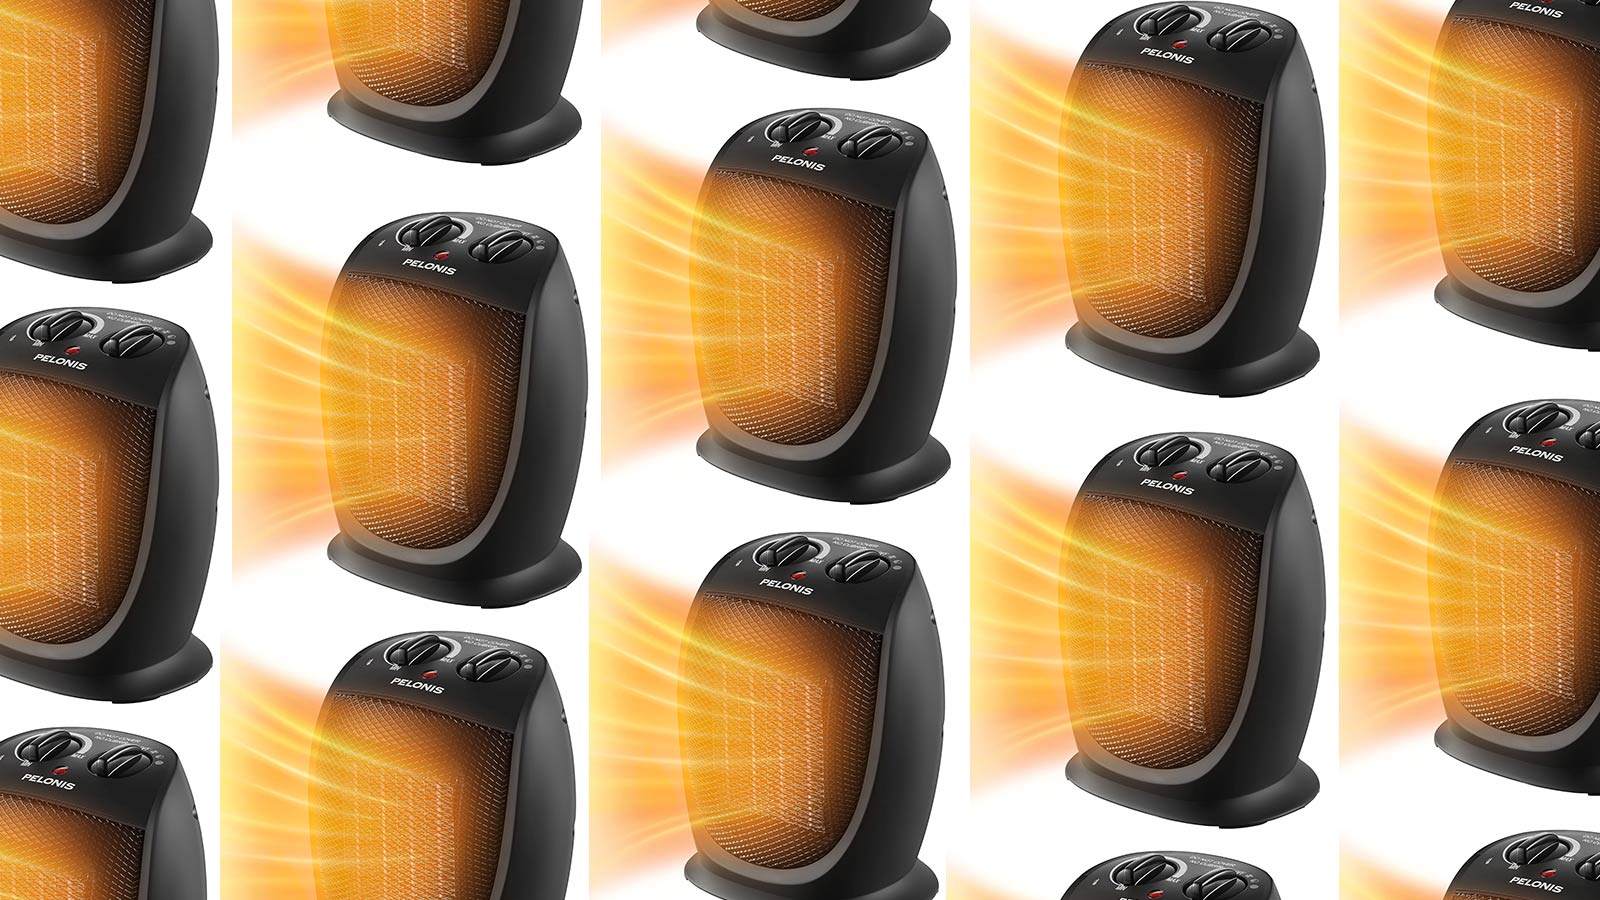 These already-affordable space heaters are even cheaper than usual at   right now